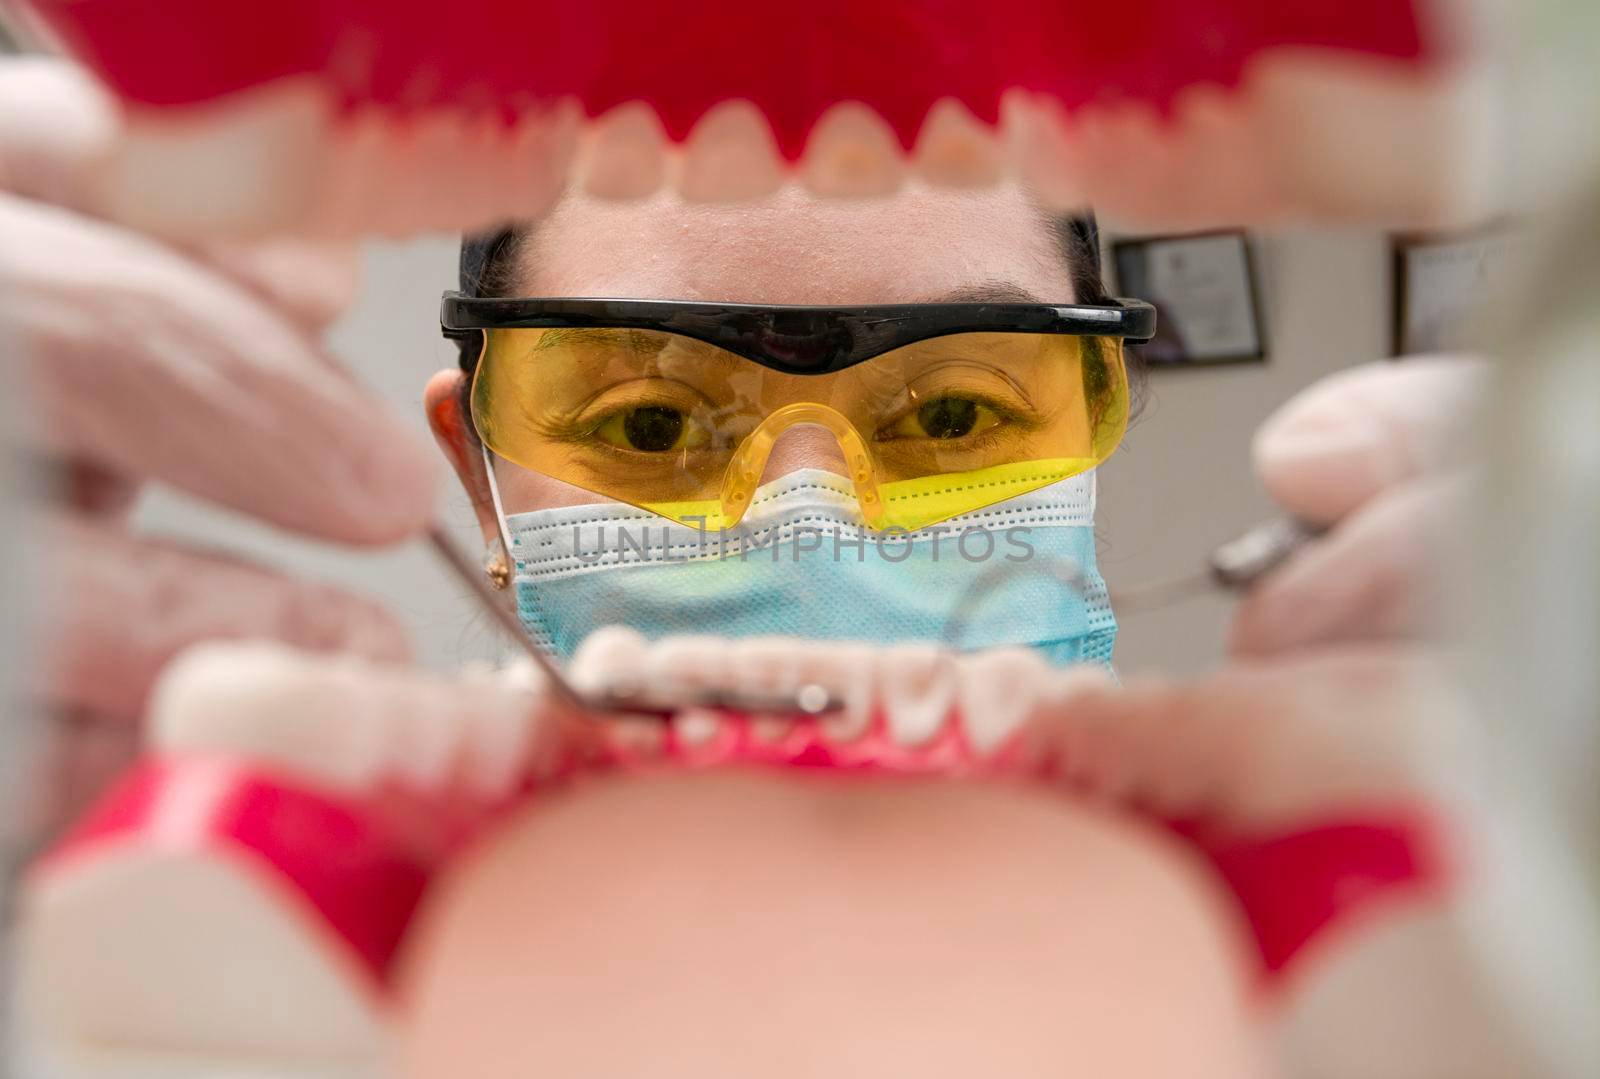 A dentist cleaning a mouth inside view, Inside view of a mouth checked by a dentist, a female dentist checking a patient. dentist checking a mouth, a dentist cleaning teeth. by isaiphoto